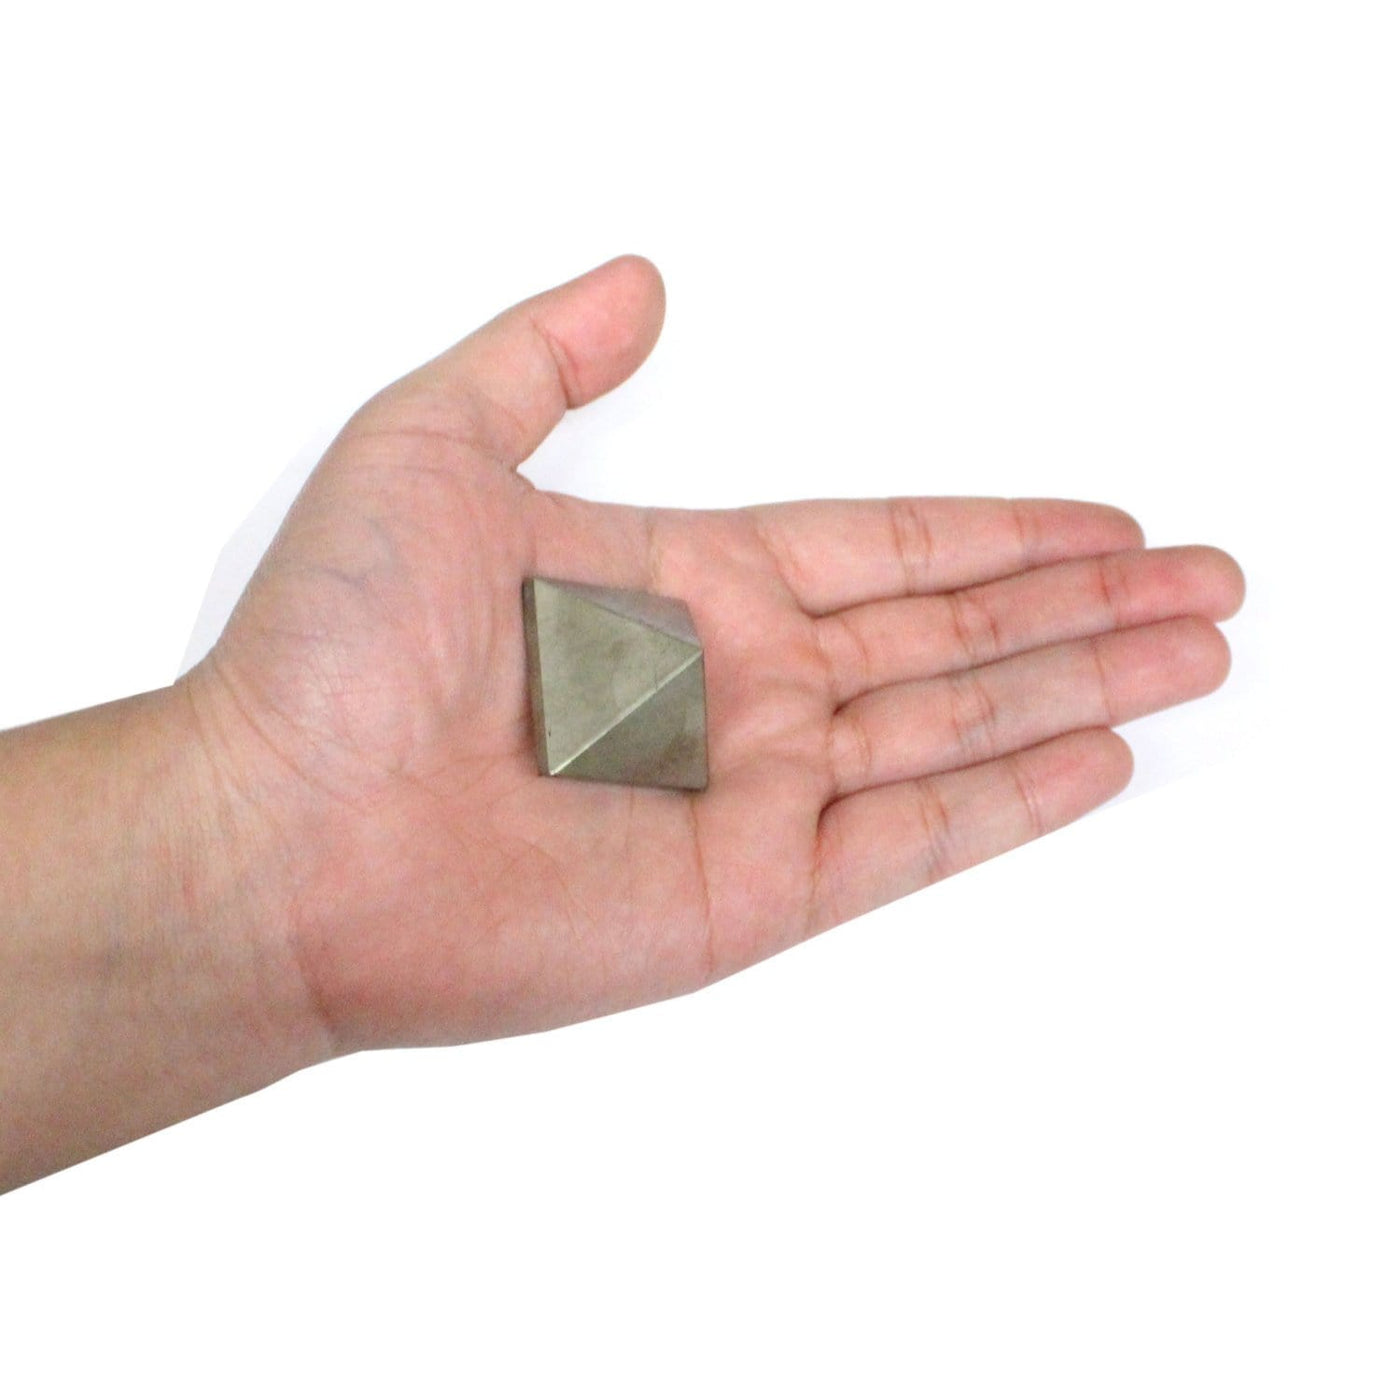 Side view of Pyrite shaped pyramid in palm of hand.